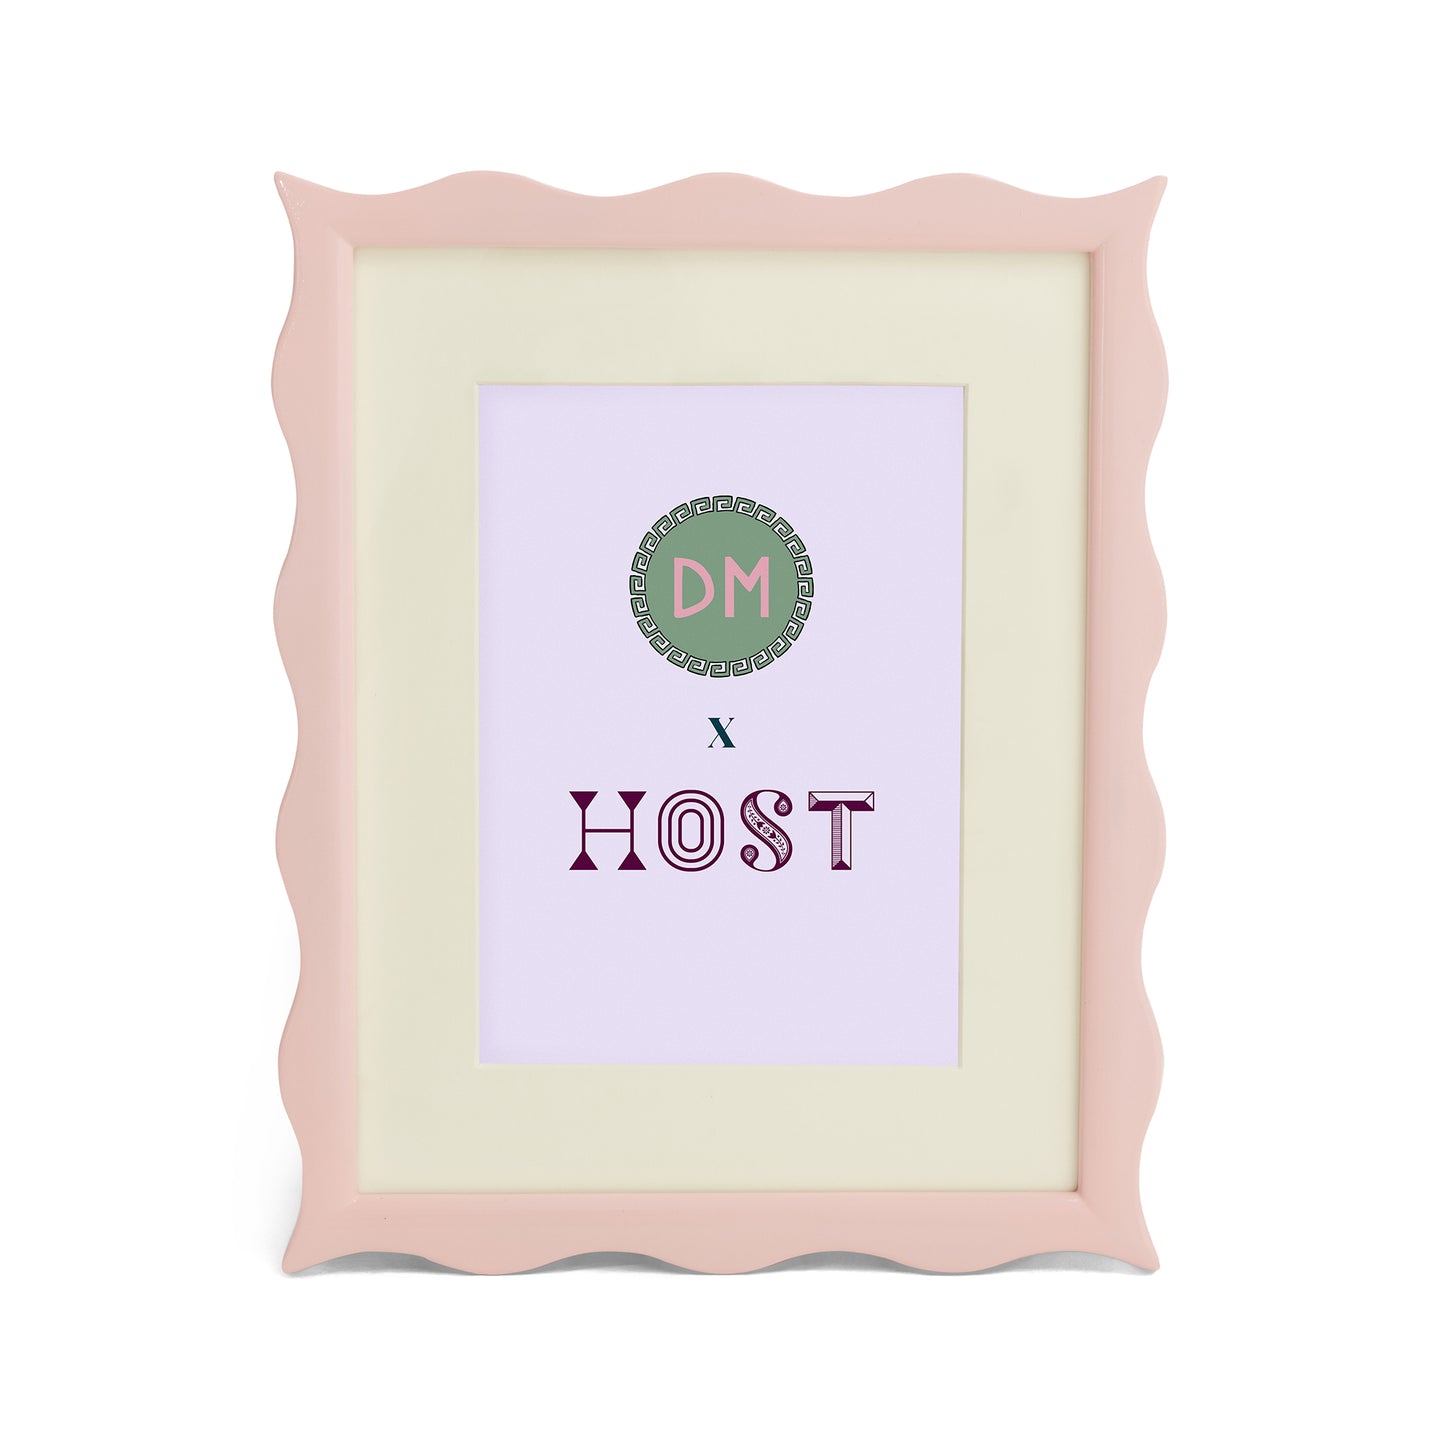 DOMENICA MARLAND X HOST RIPPLE FRAME, NANCY'S BLUSHES PINK, A5